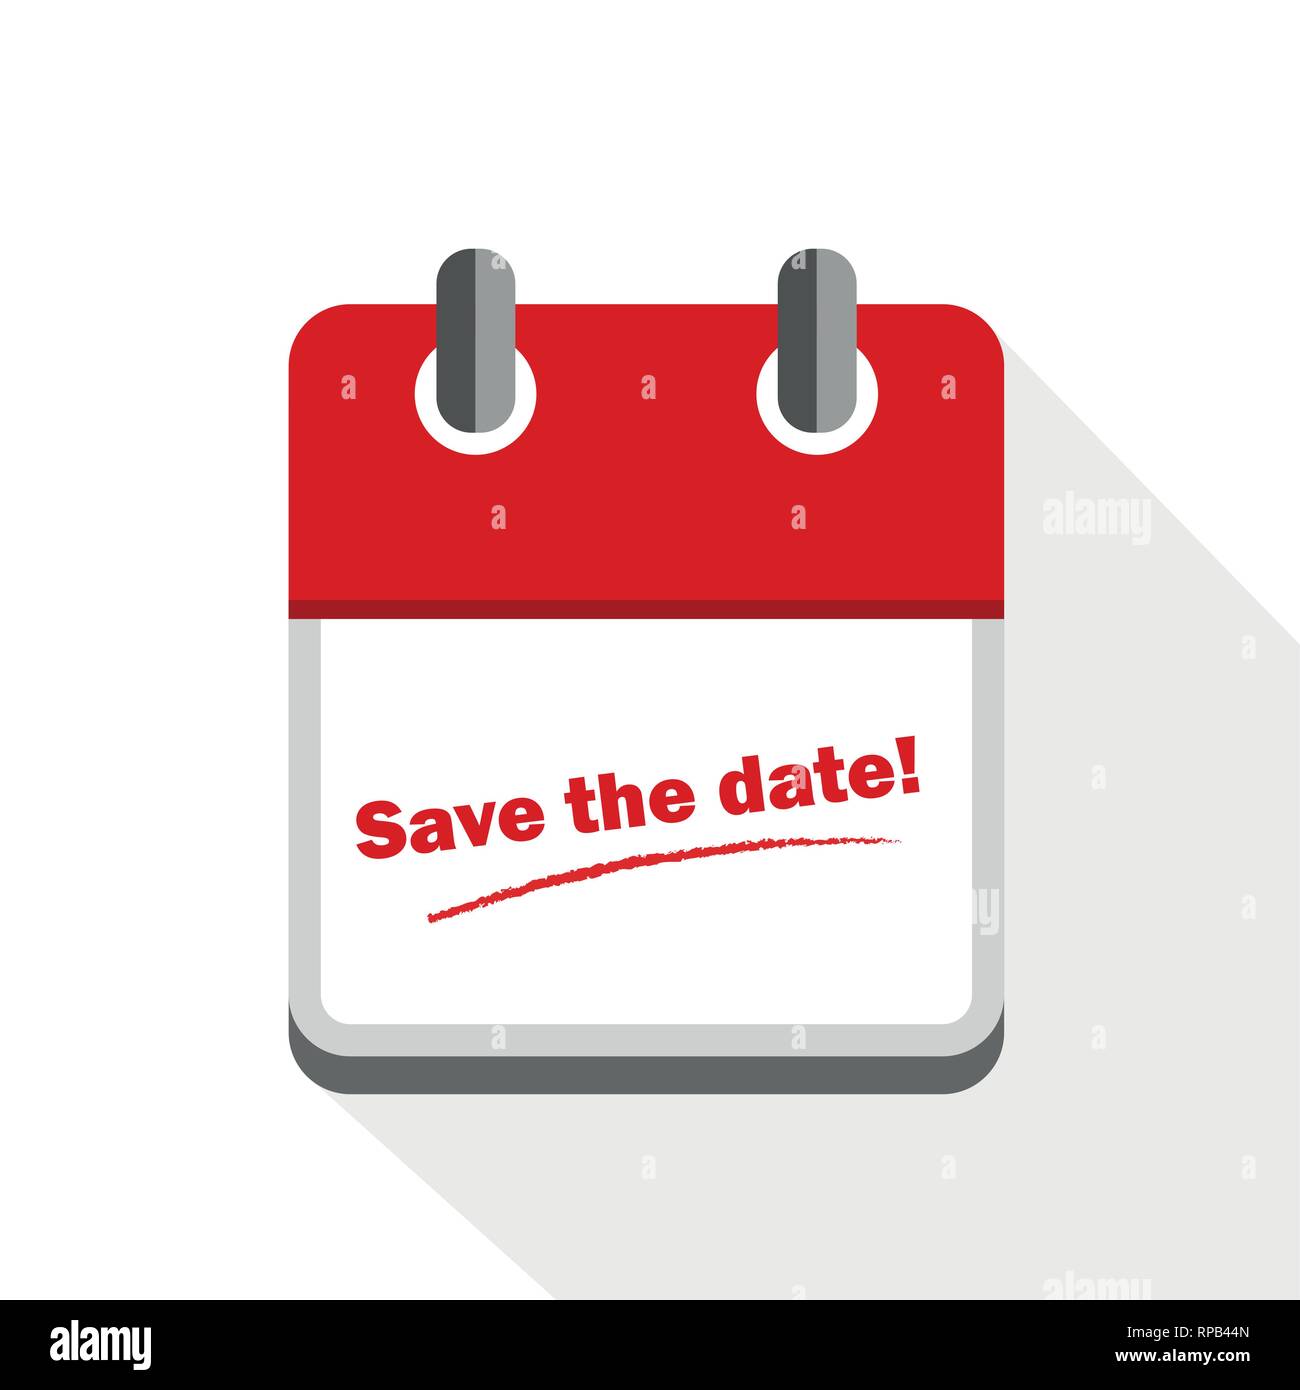 save the date red calendar icon vector illustration EPS10 Stock Vector